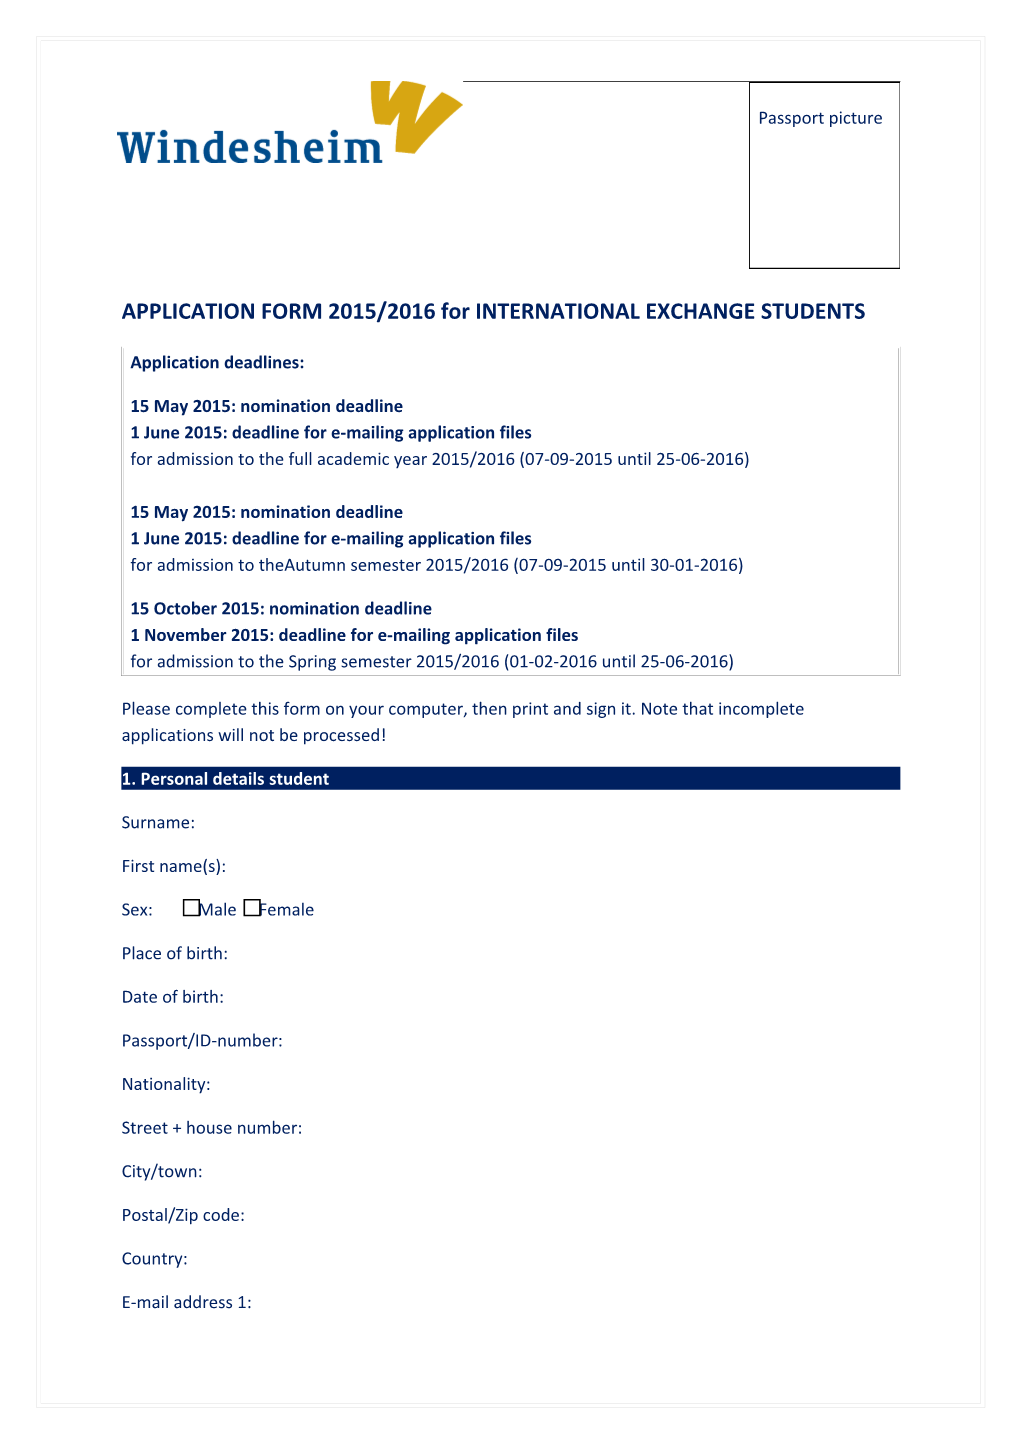 APPLICATION FORM 2015/2016 for INTERNATIONAL EXCHANGE STUDENTS